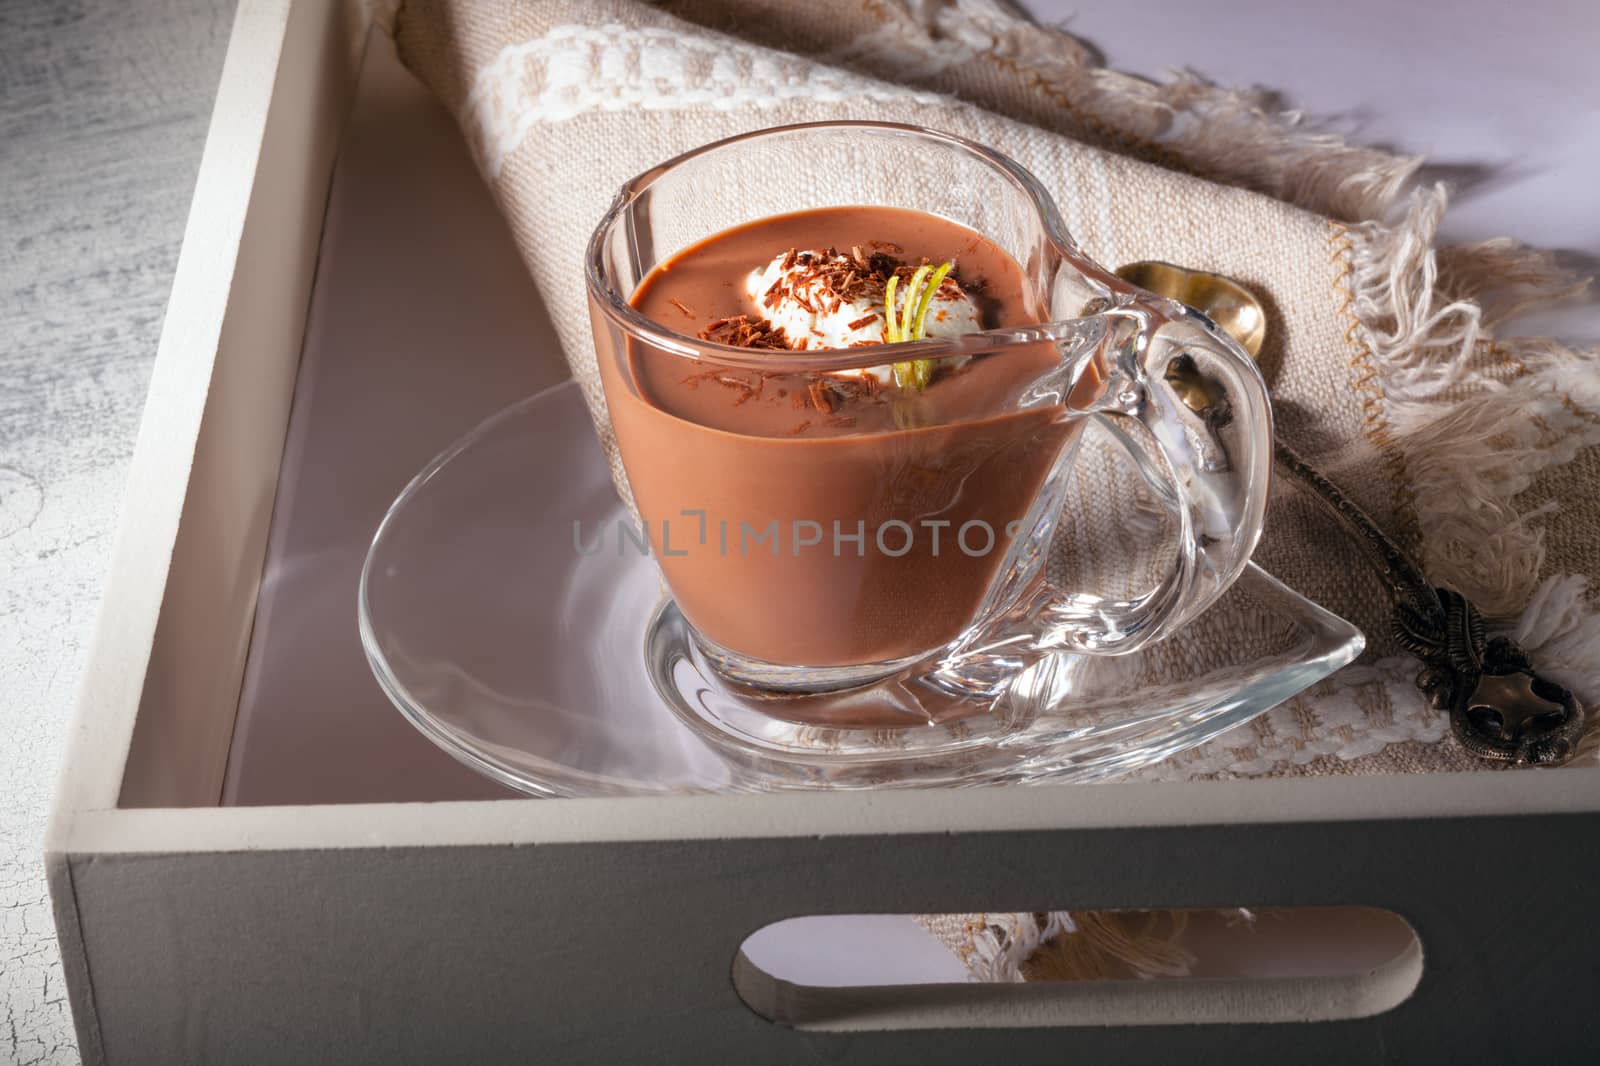 Chocolate Mousse Dessert with cream by supercat67